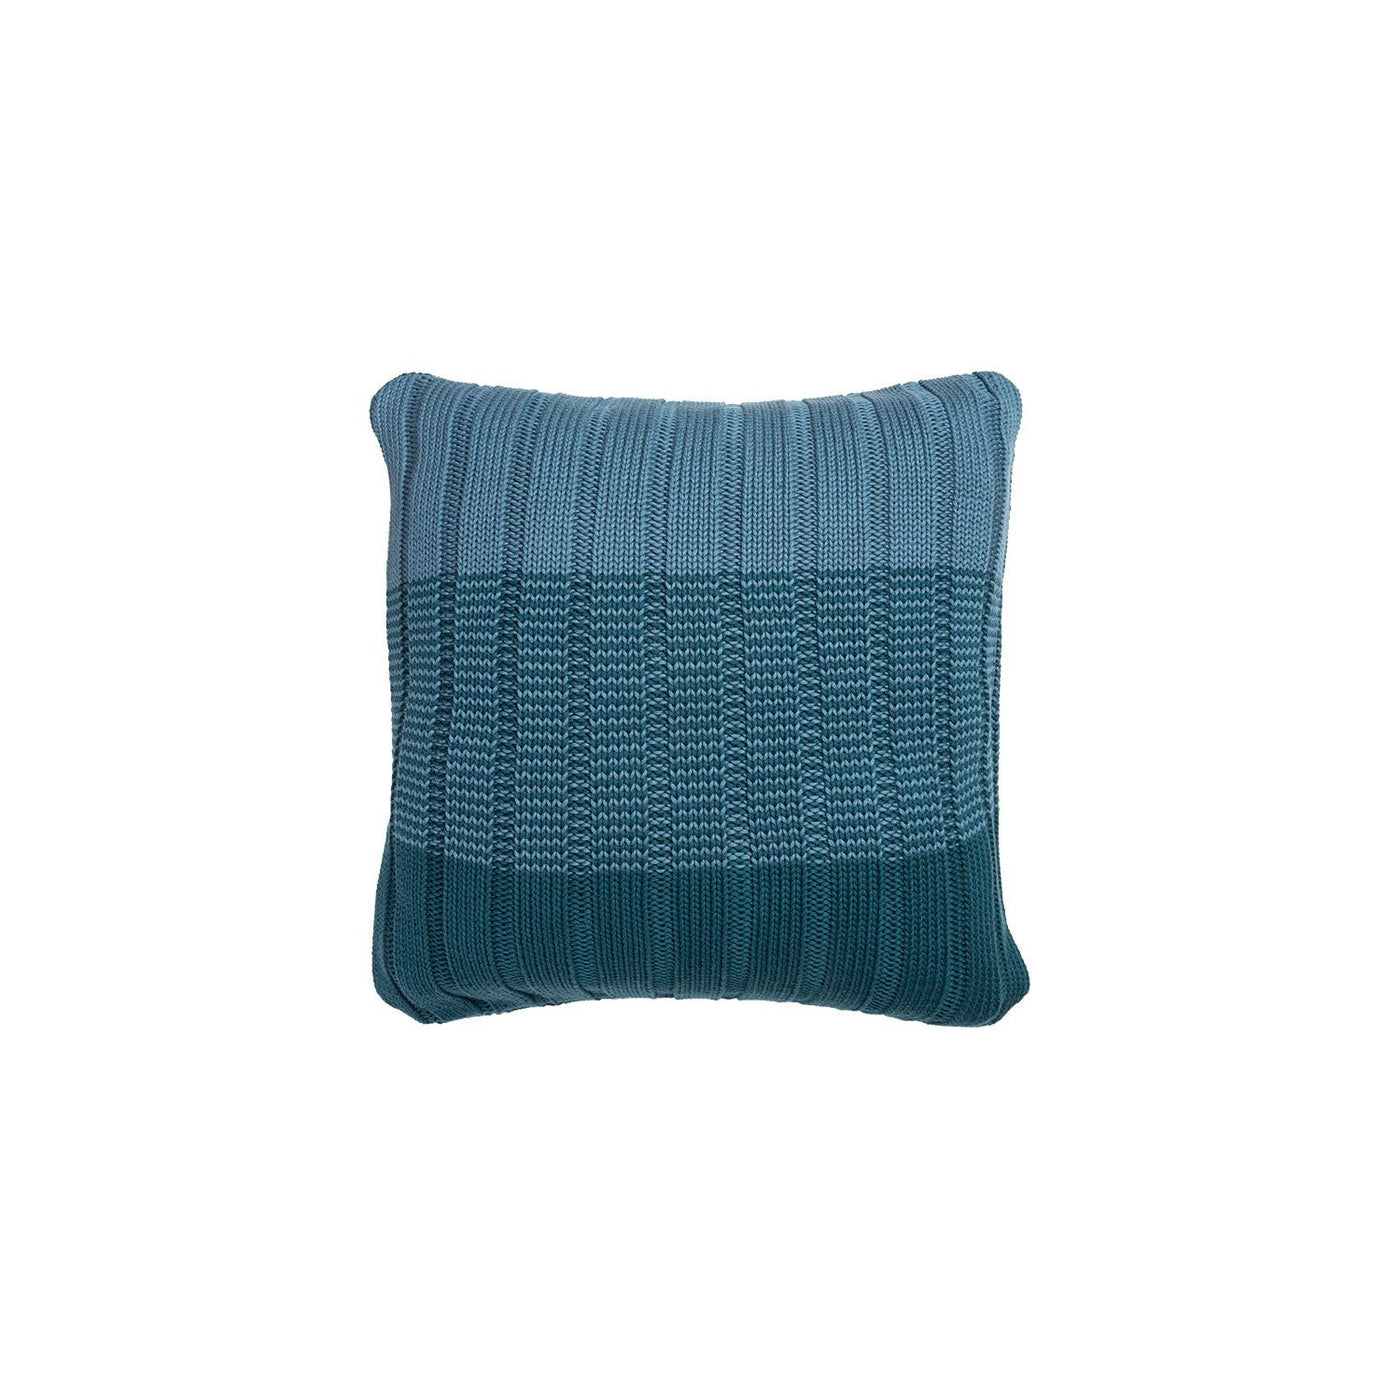 Blue Knit Pillow Cover